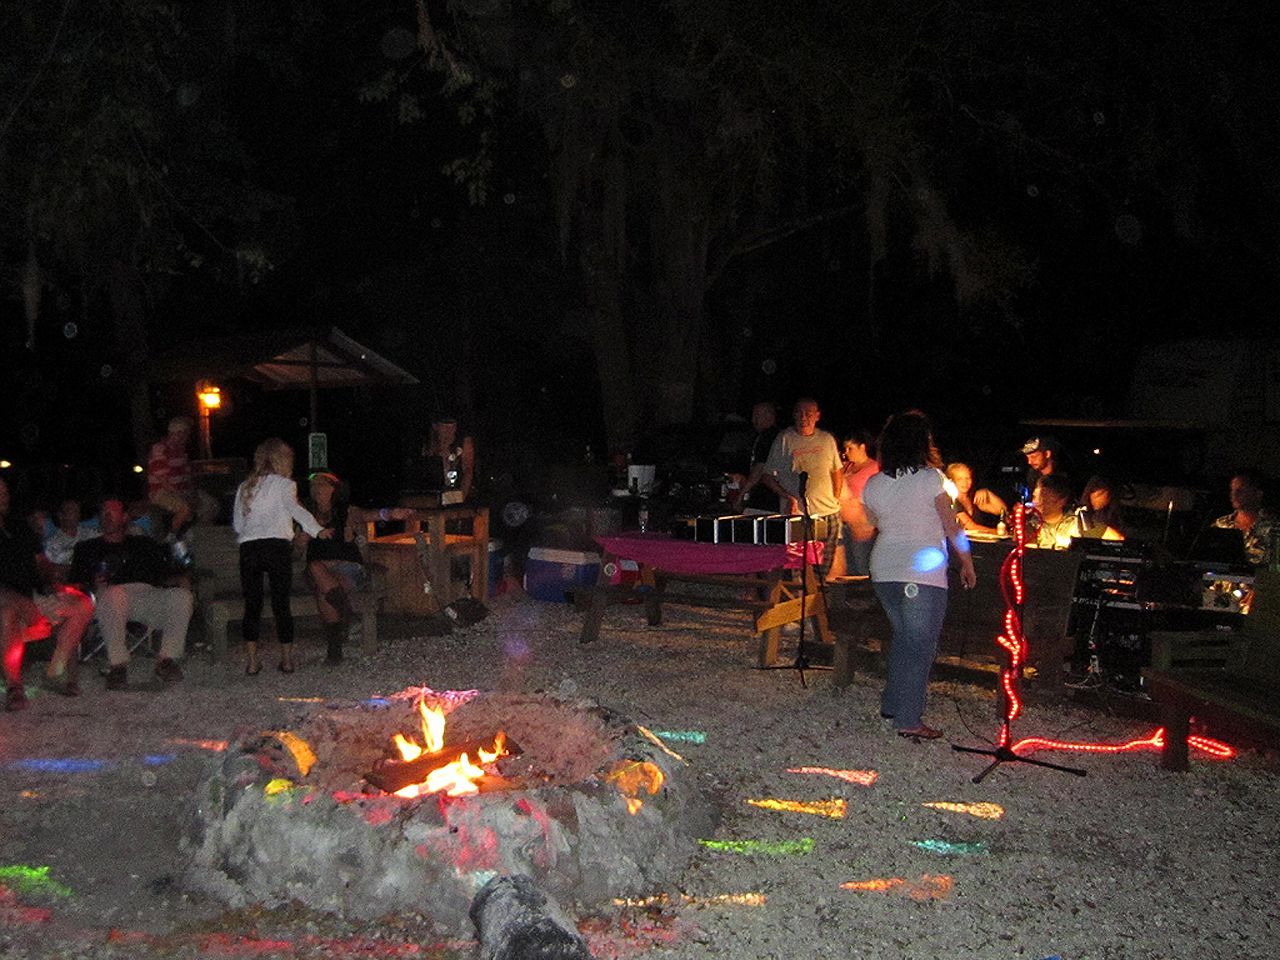 a group of people are standing around a fire pit at night .